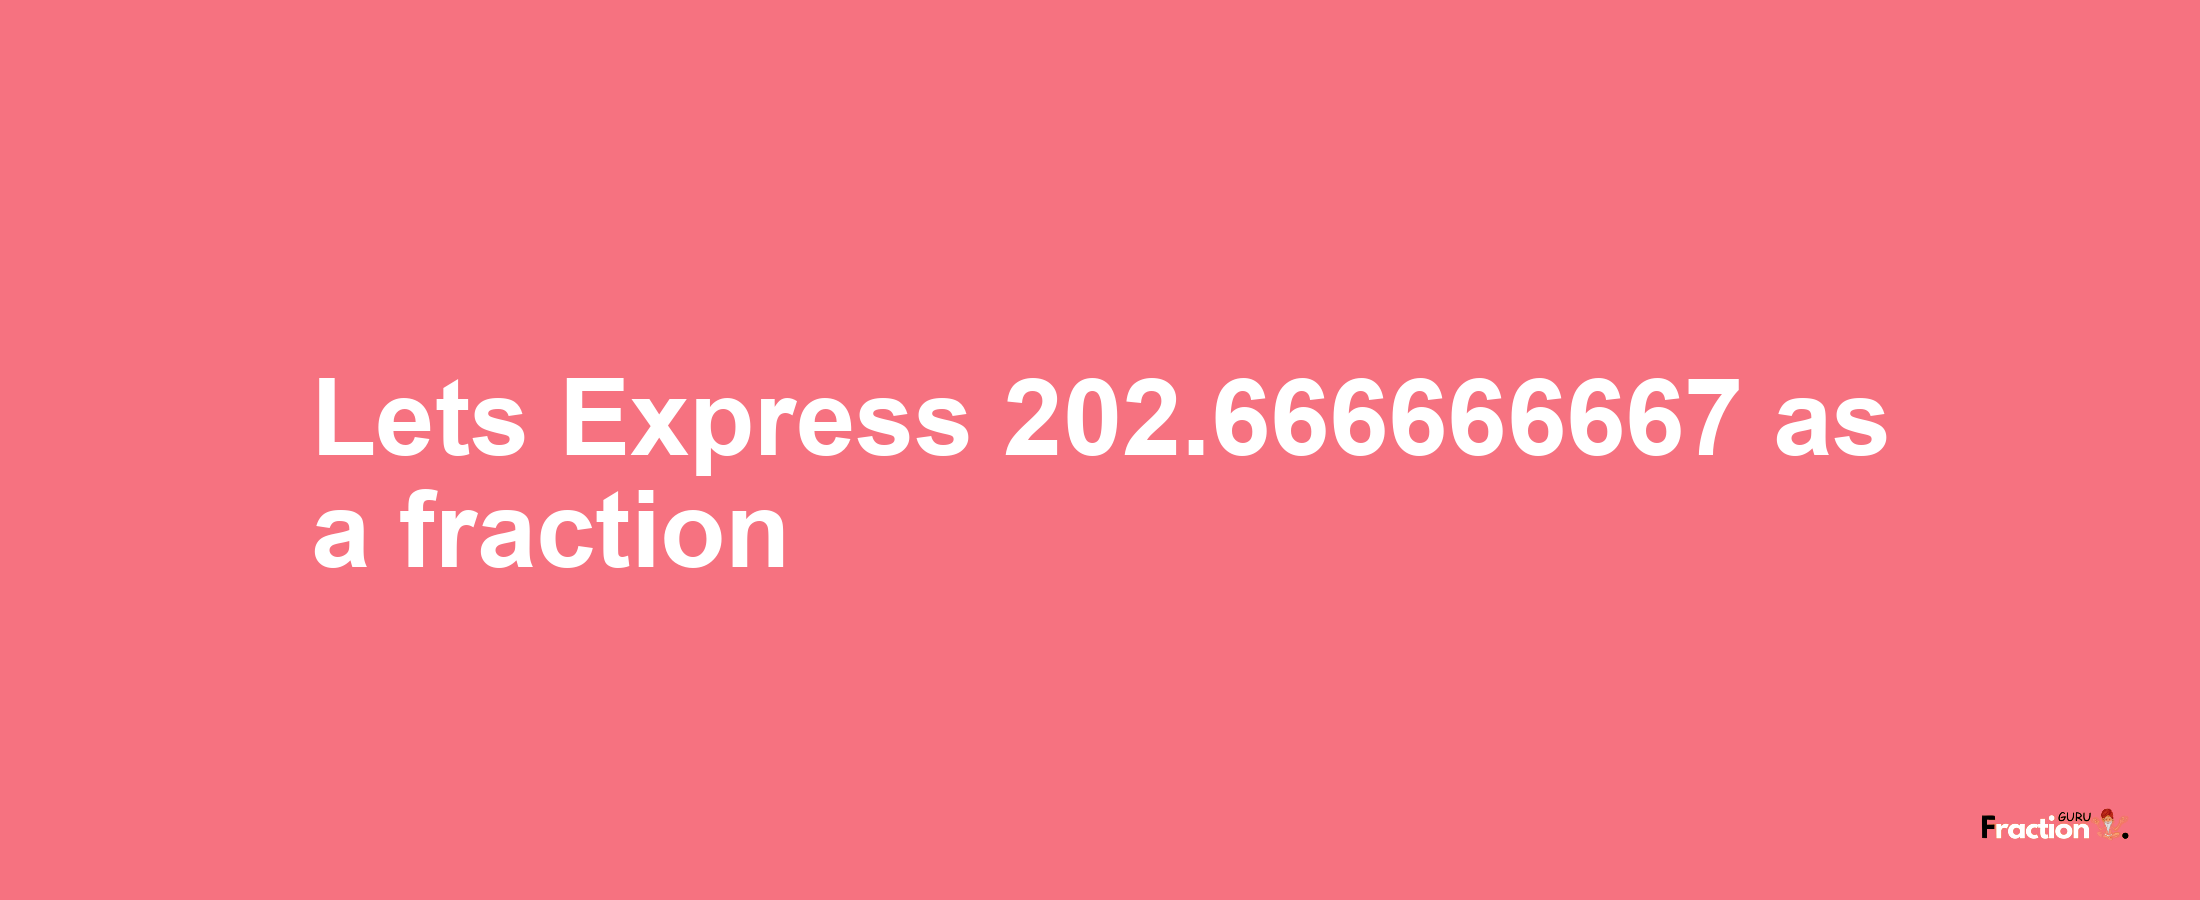 Lets Express 202.666666667 as afraction